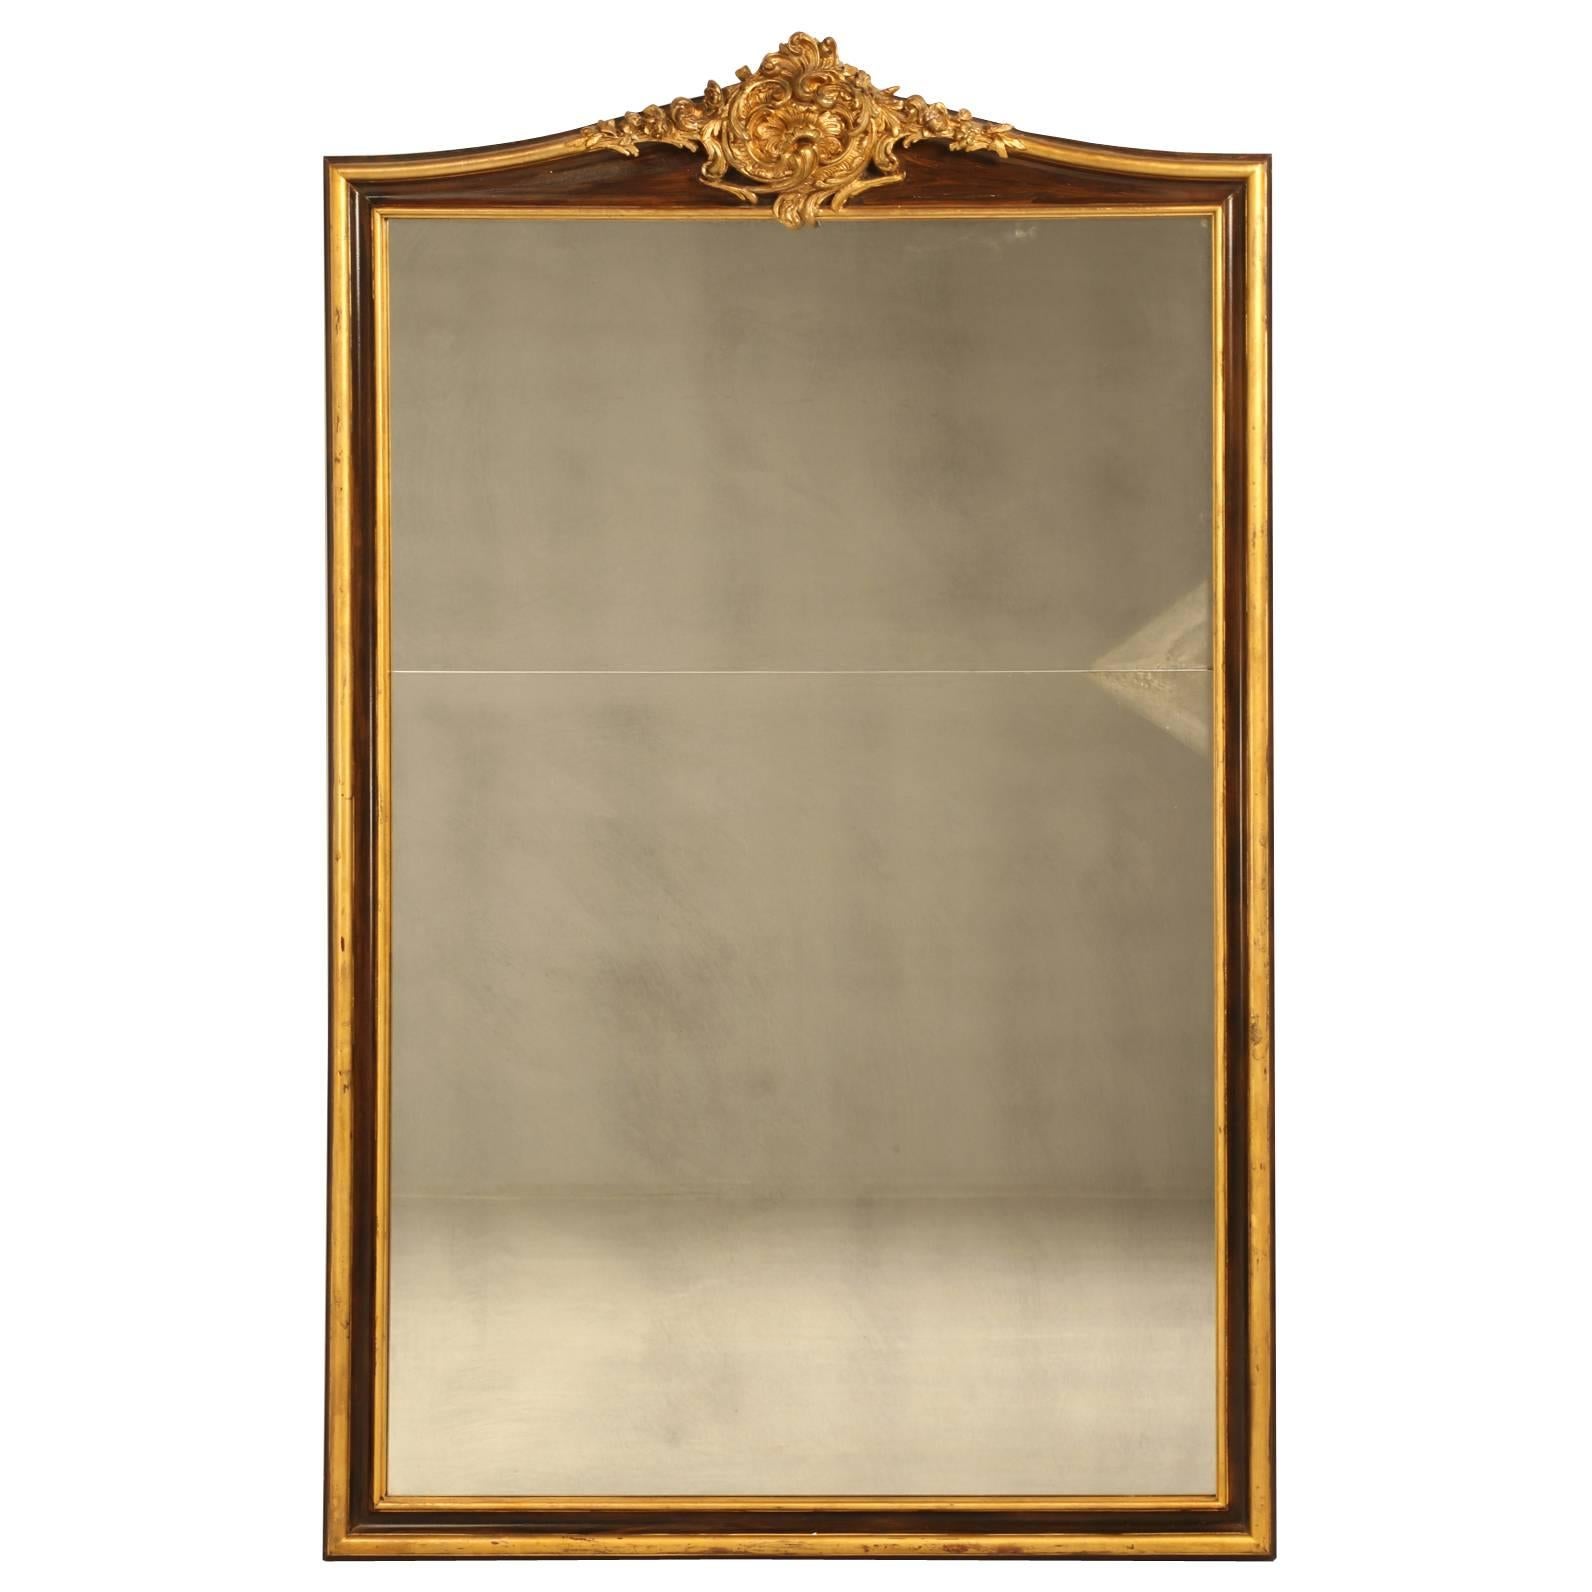 French Mirror of a Grand Scale with 24KT Gold Leaf Hand-Carved Frame 